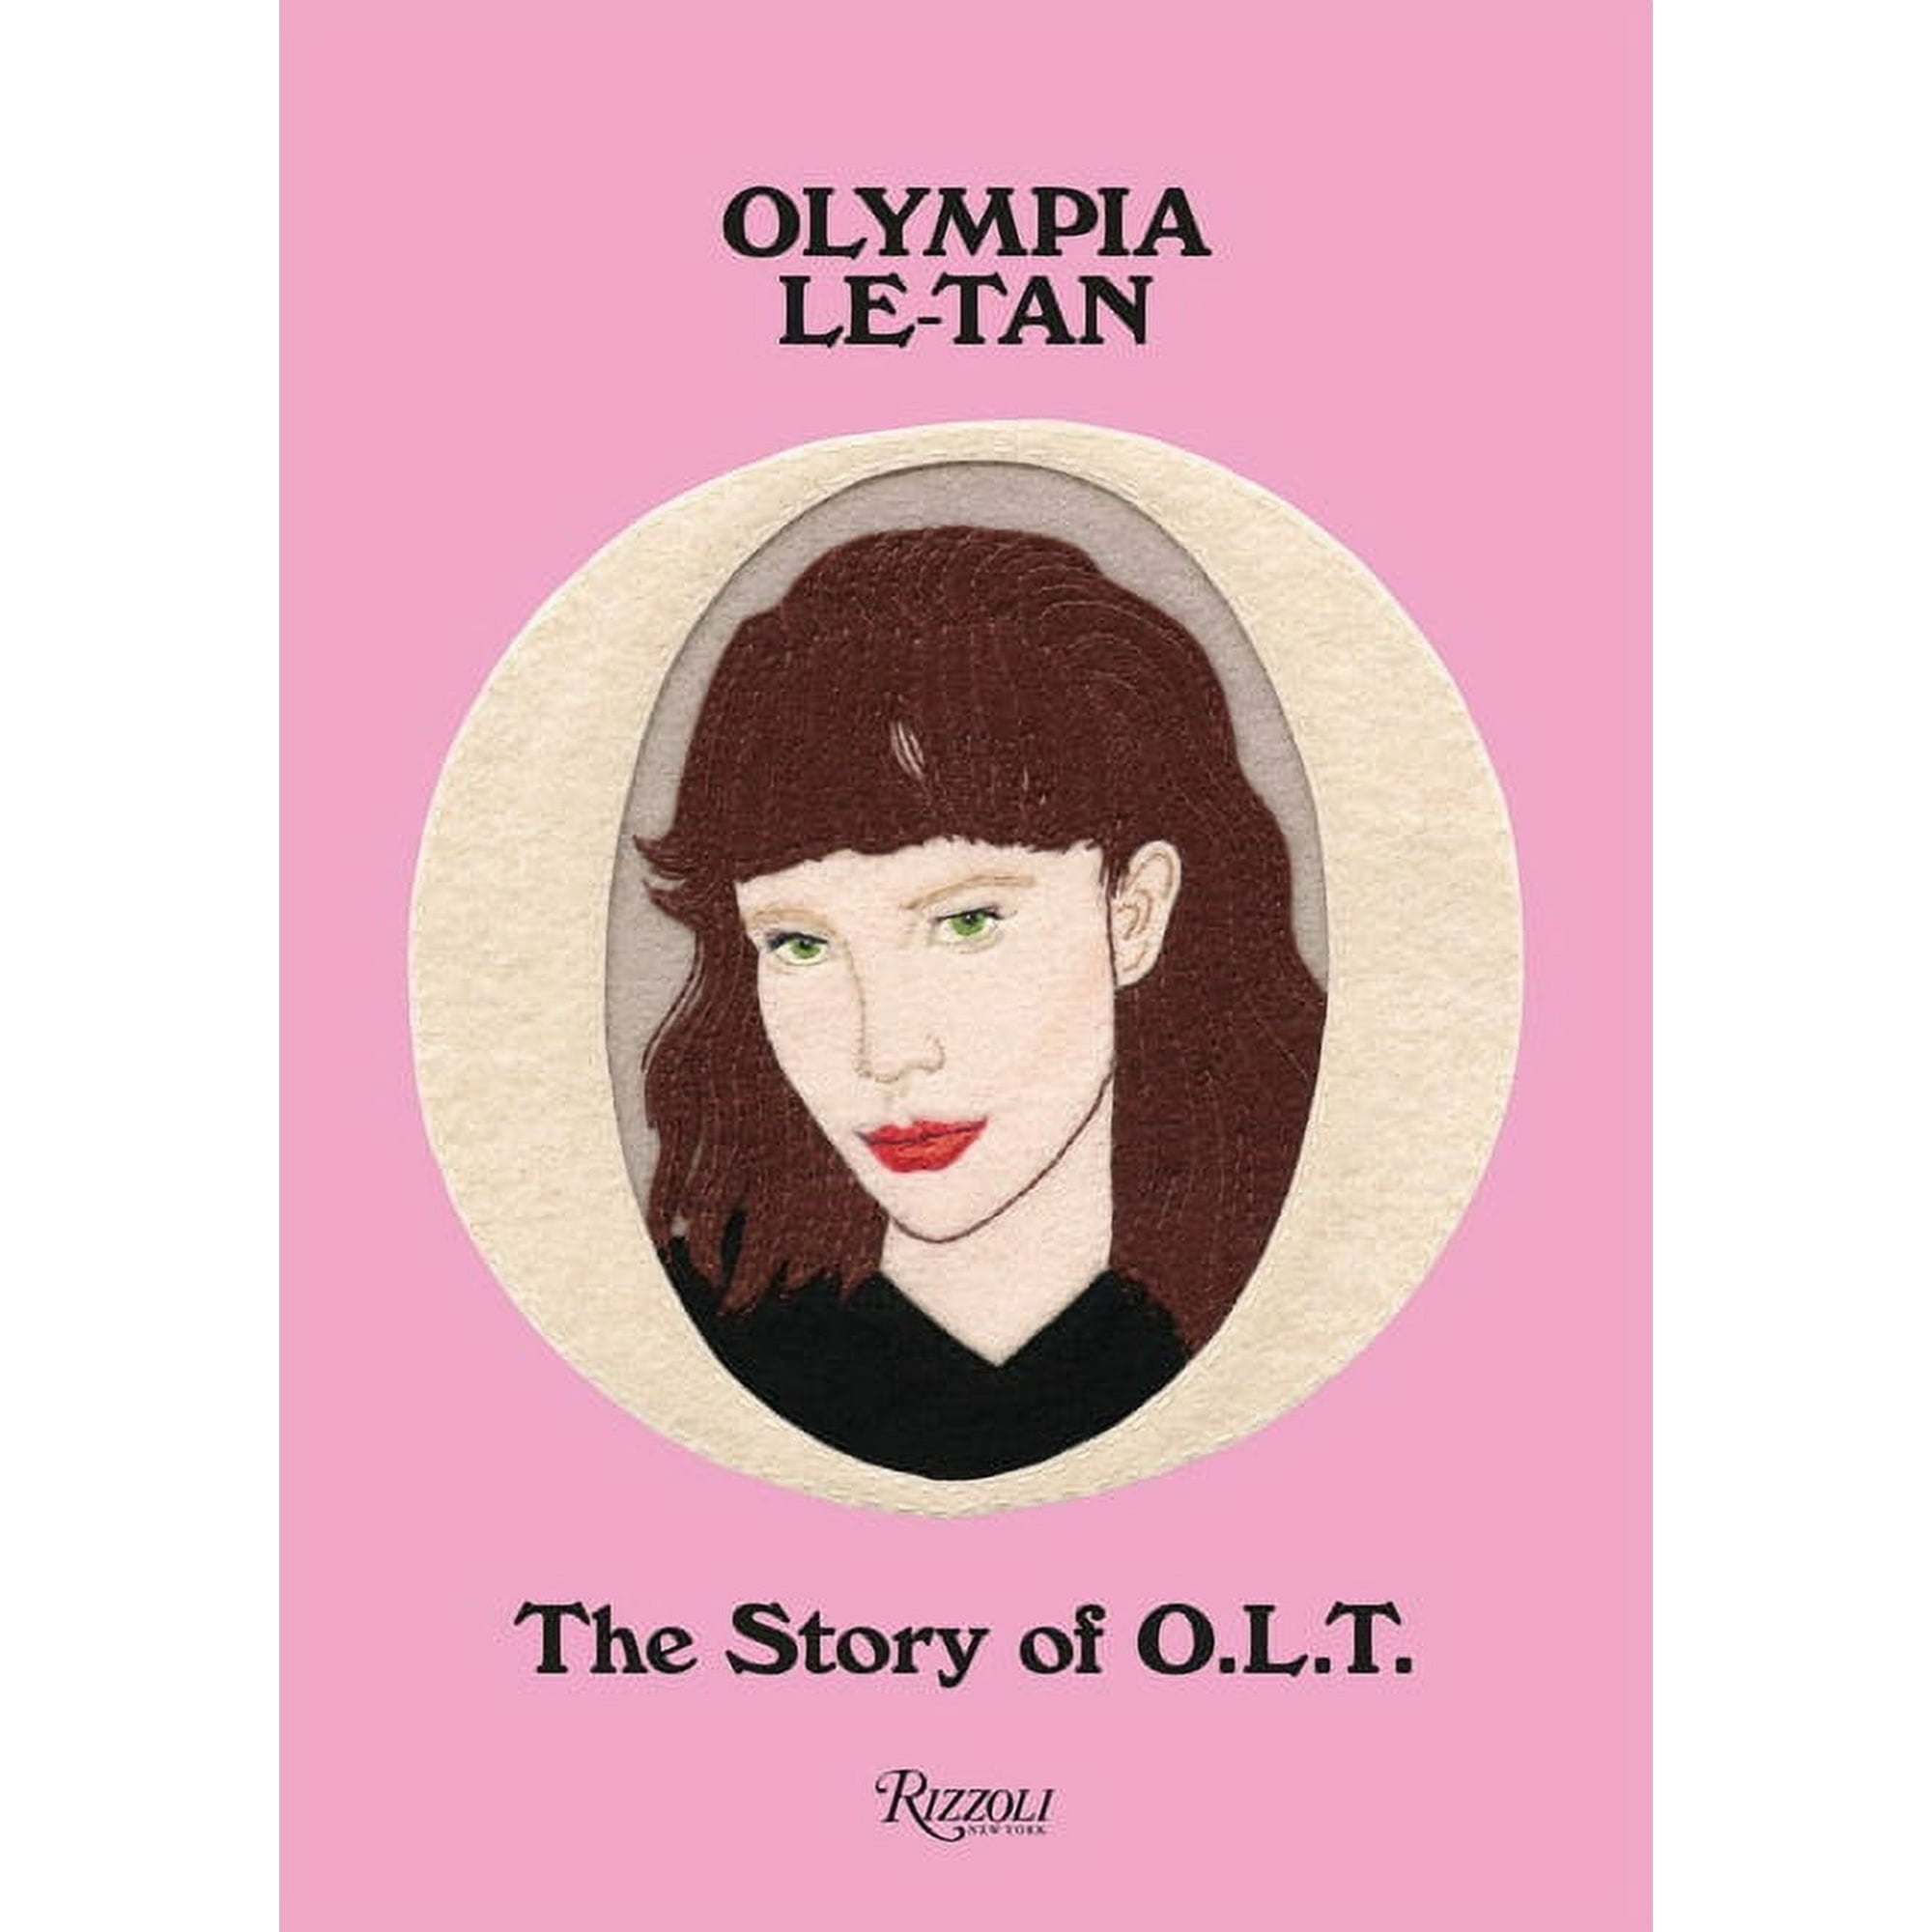 Olympia Le-Tan: The Story of O.L.T. [Book]